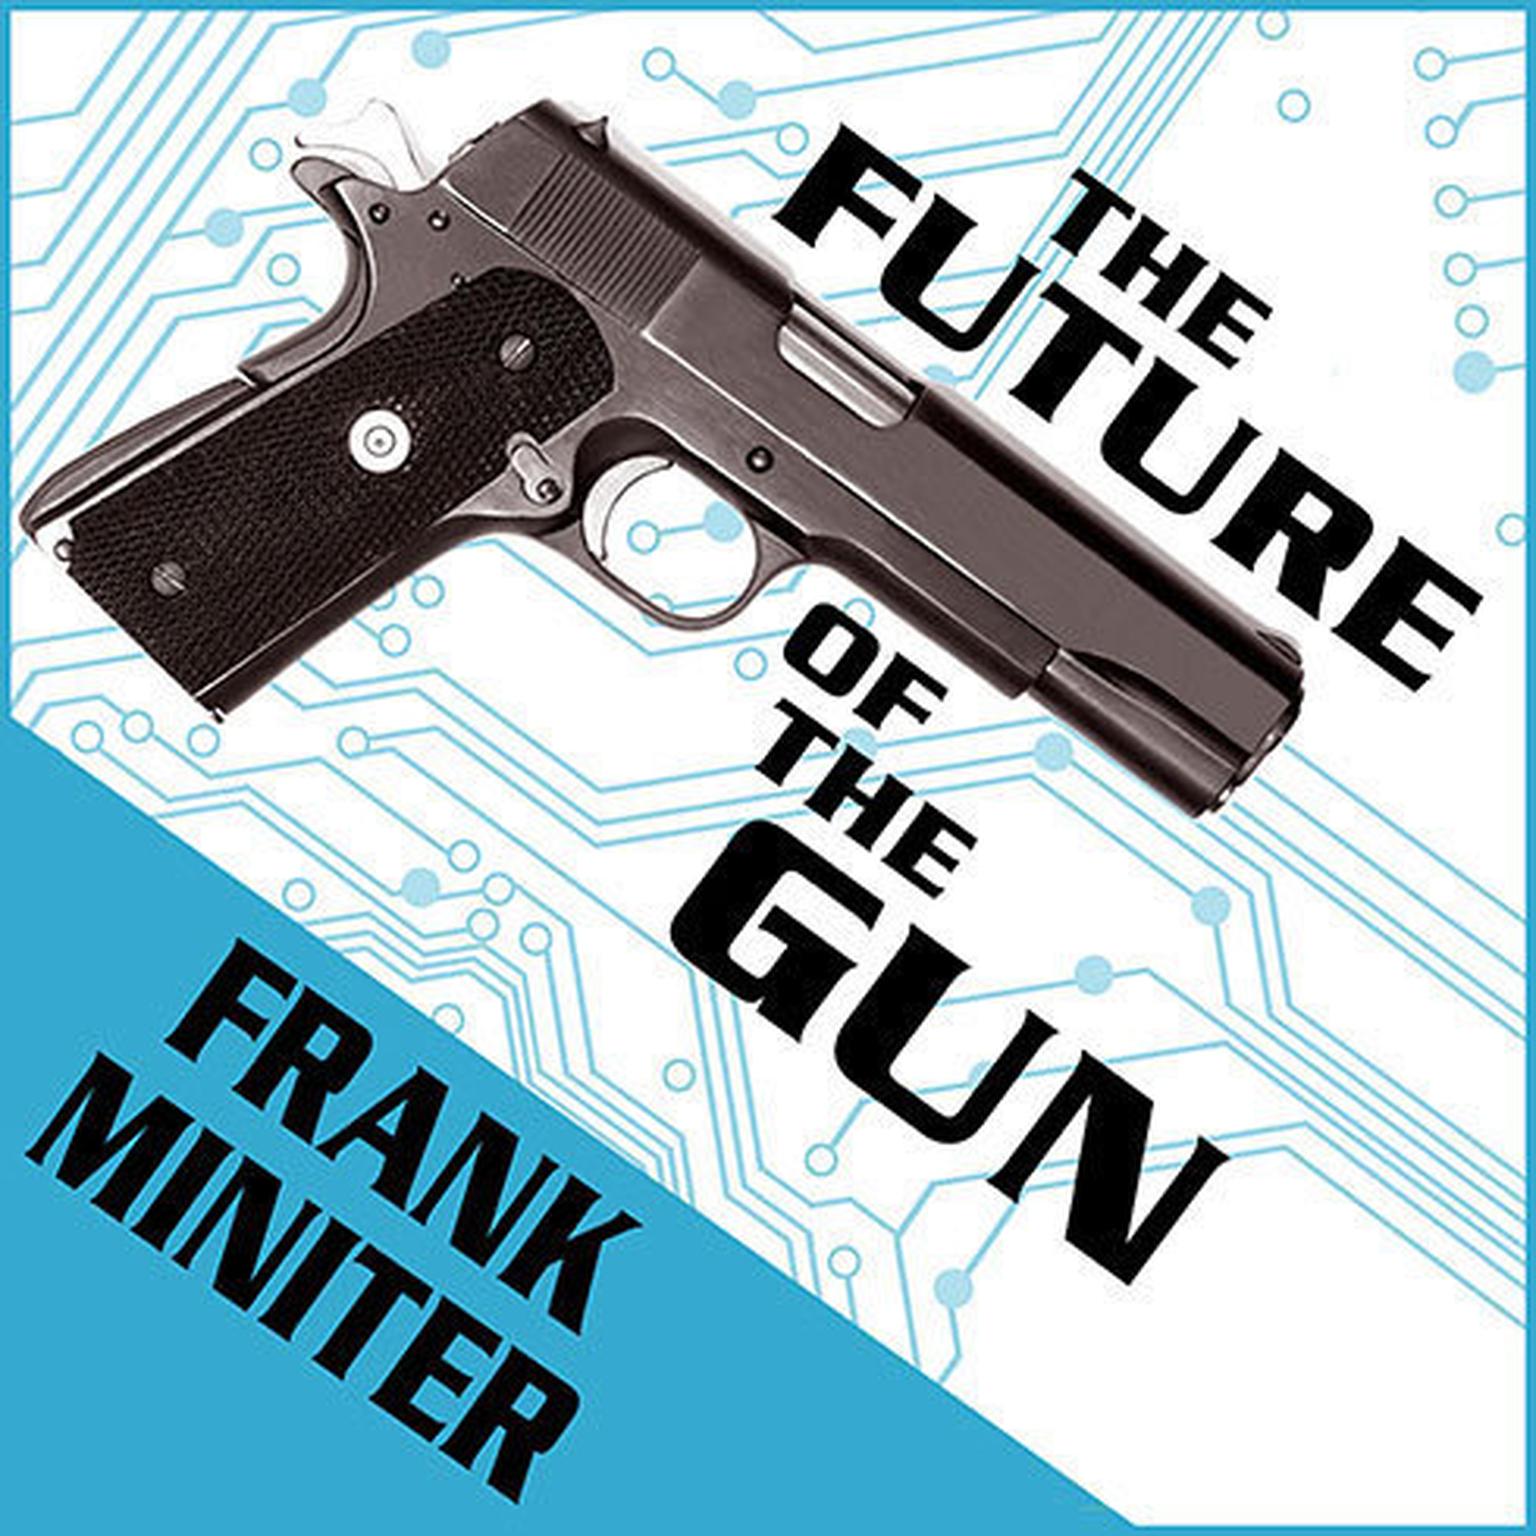 The Future of the Gun Audiobook, by Frank Miniter